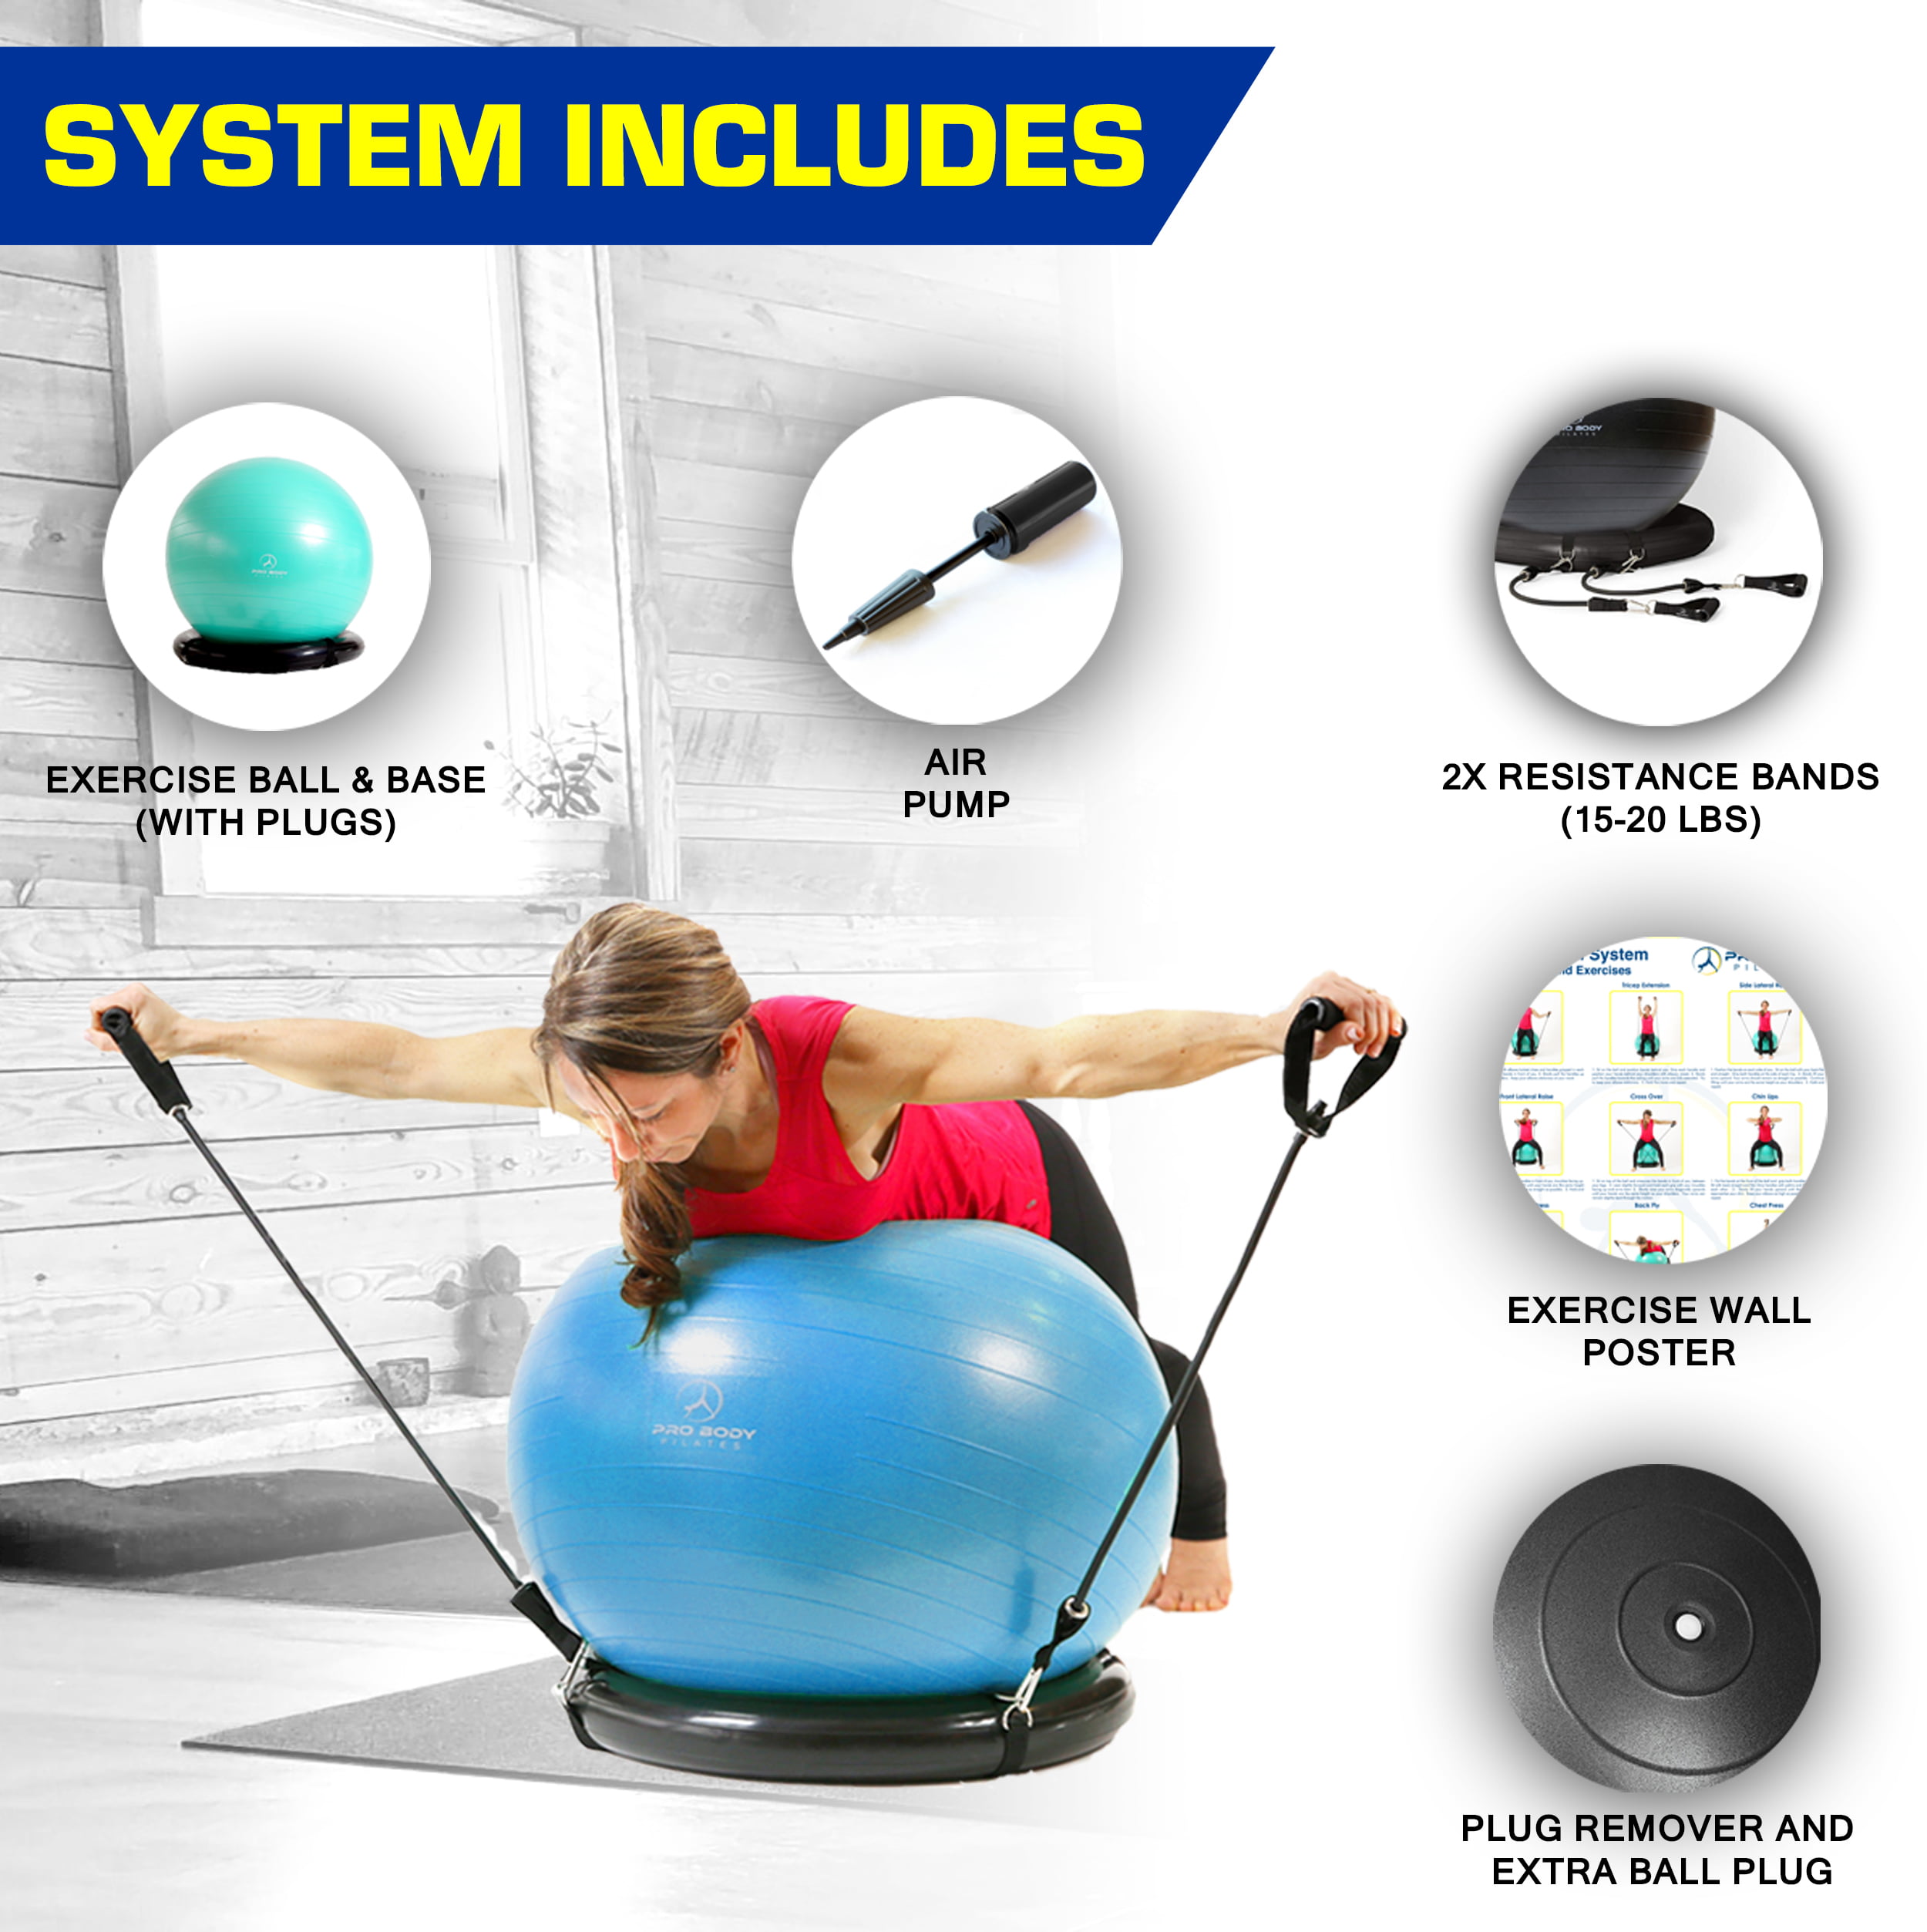 Equipment for Women and Men Improve Balance and Posture Premium Quality Ball Chair for Fitness NEUMEE Yoga Exercise Ball & Stability Base with Resistance Bands for Home Gym & Office